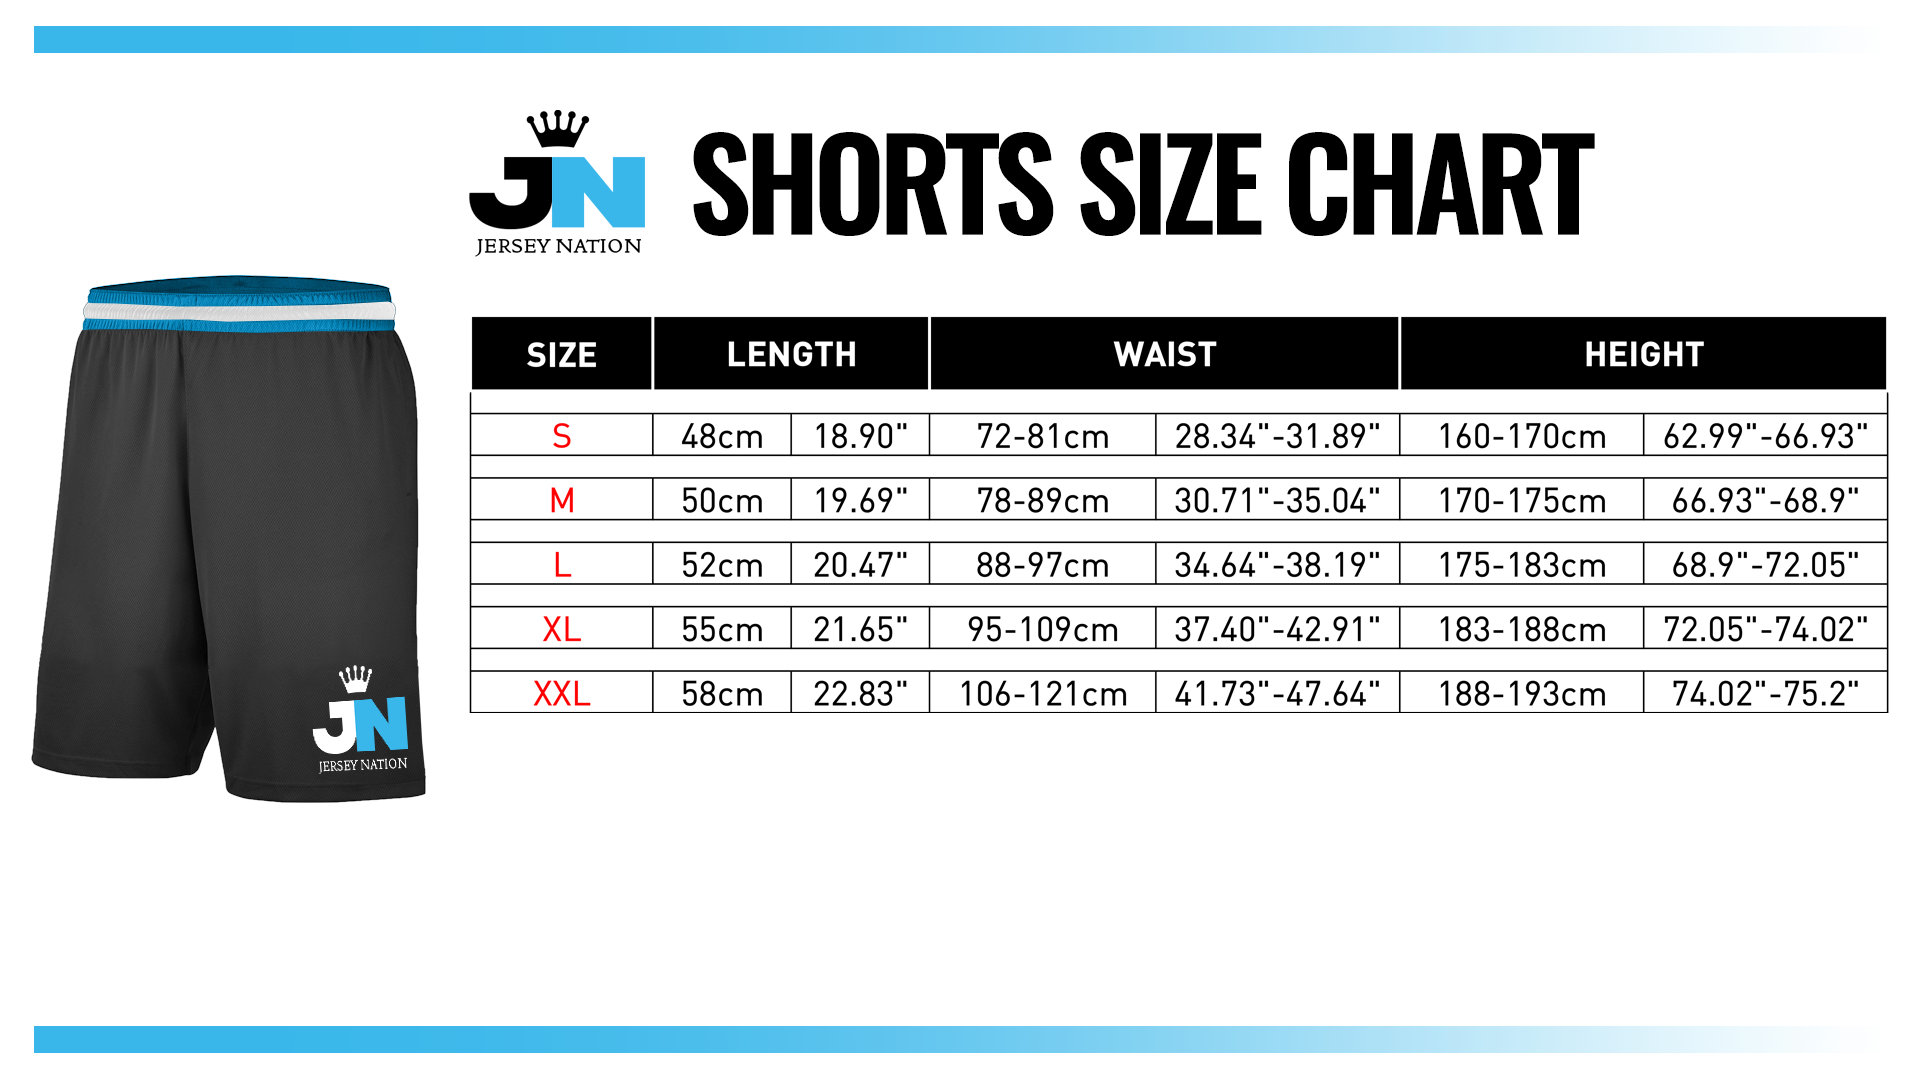 Size Chart – The Jersey Nation